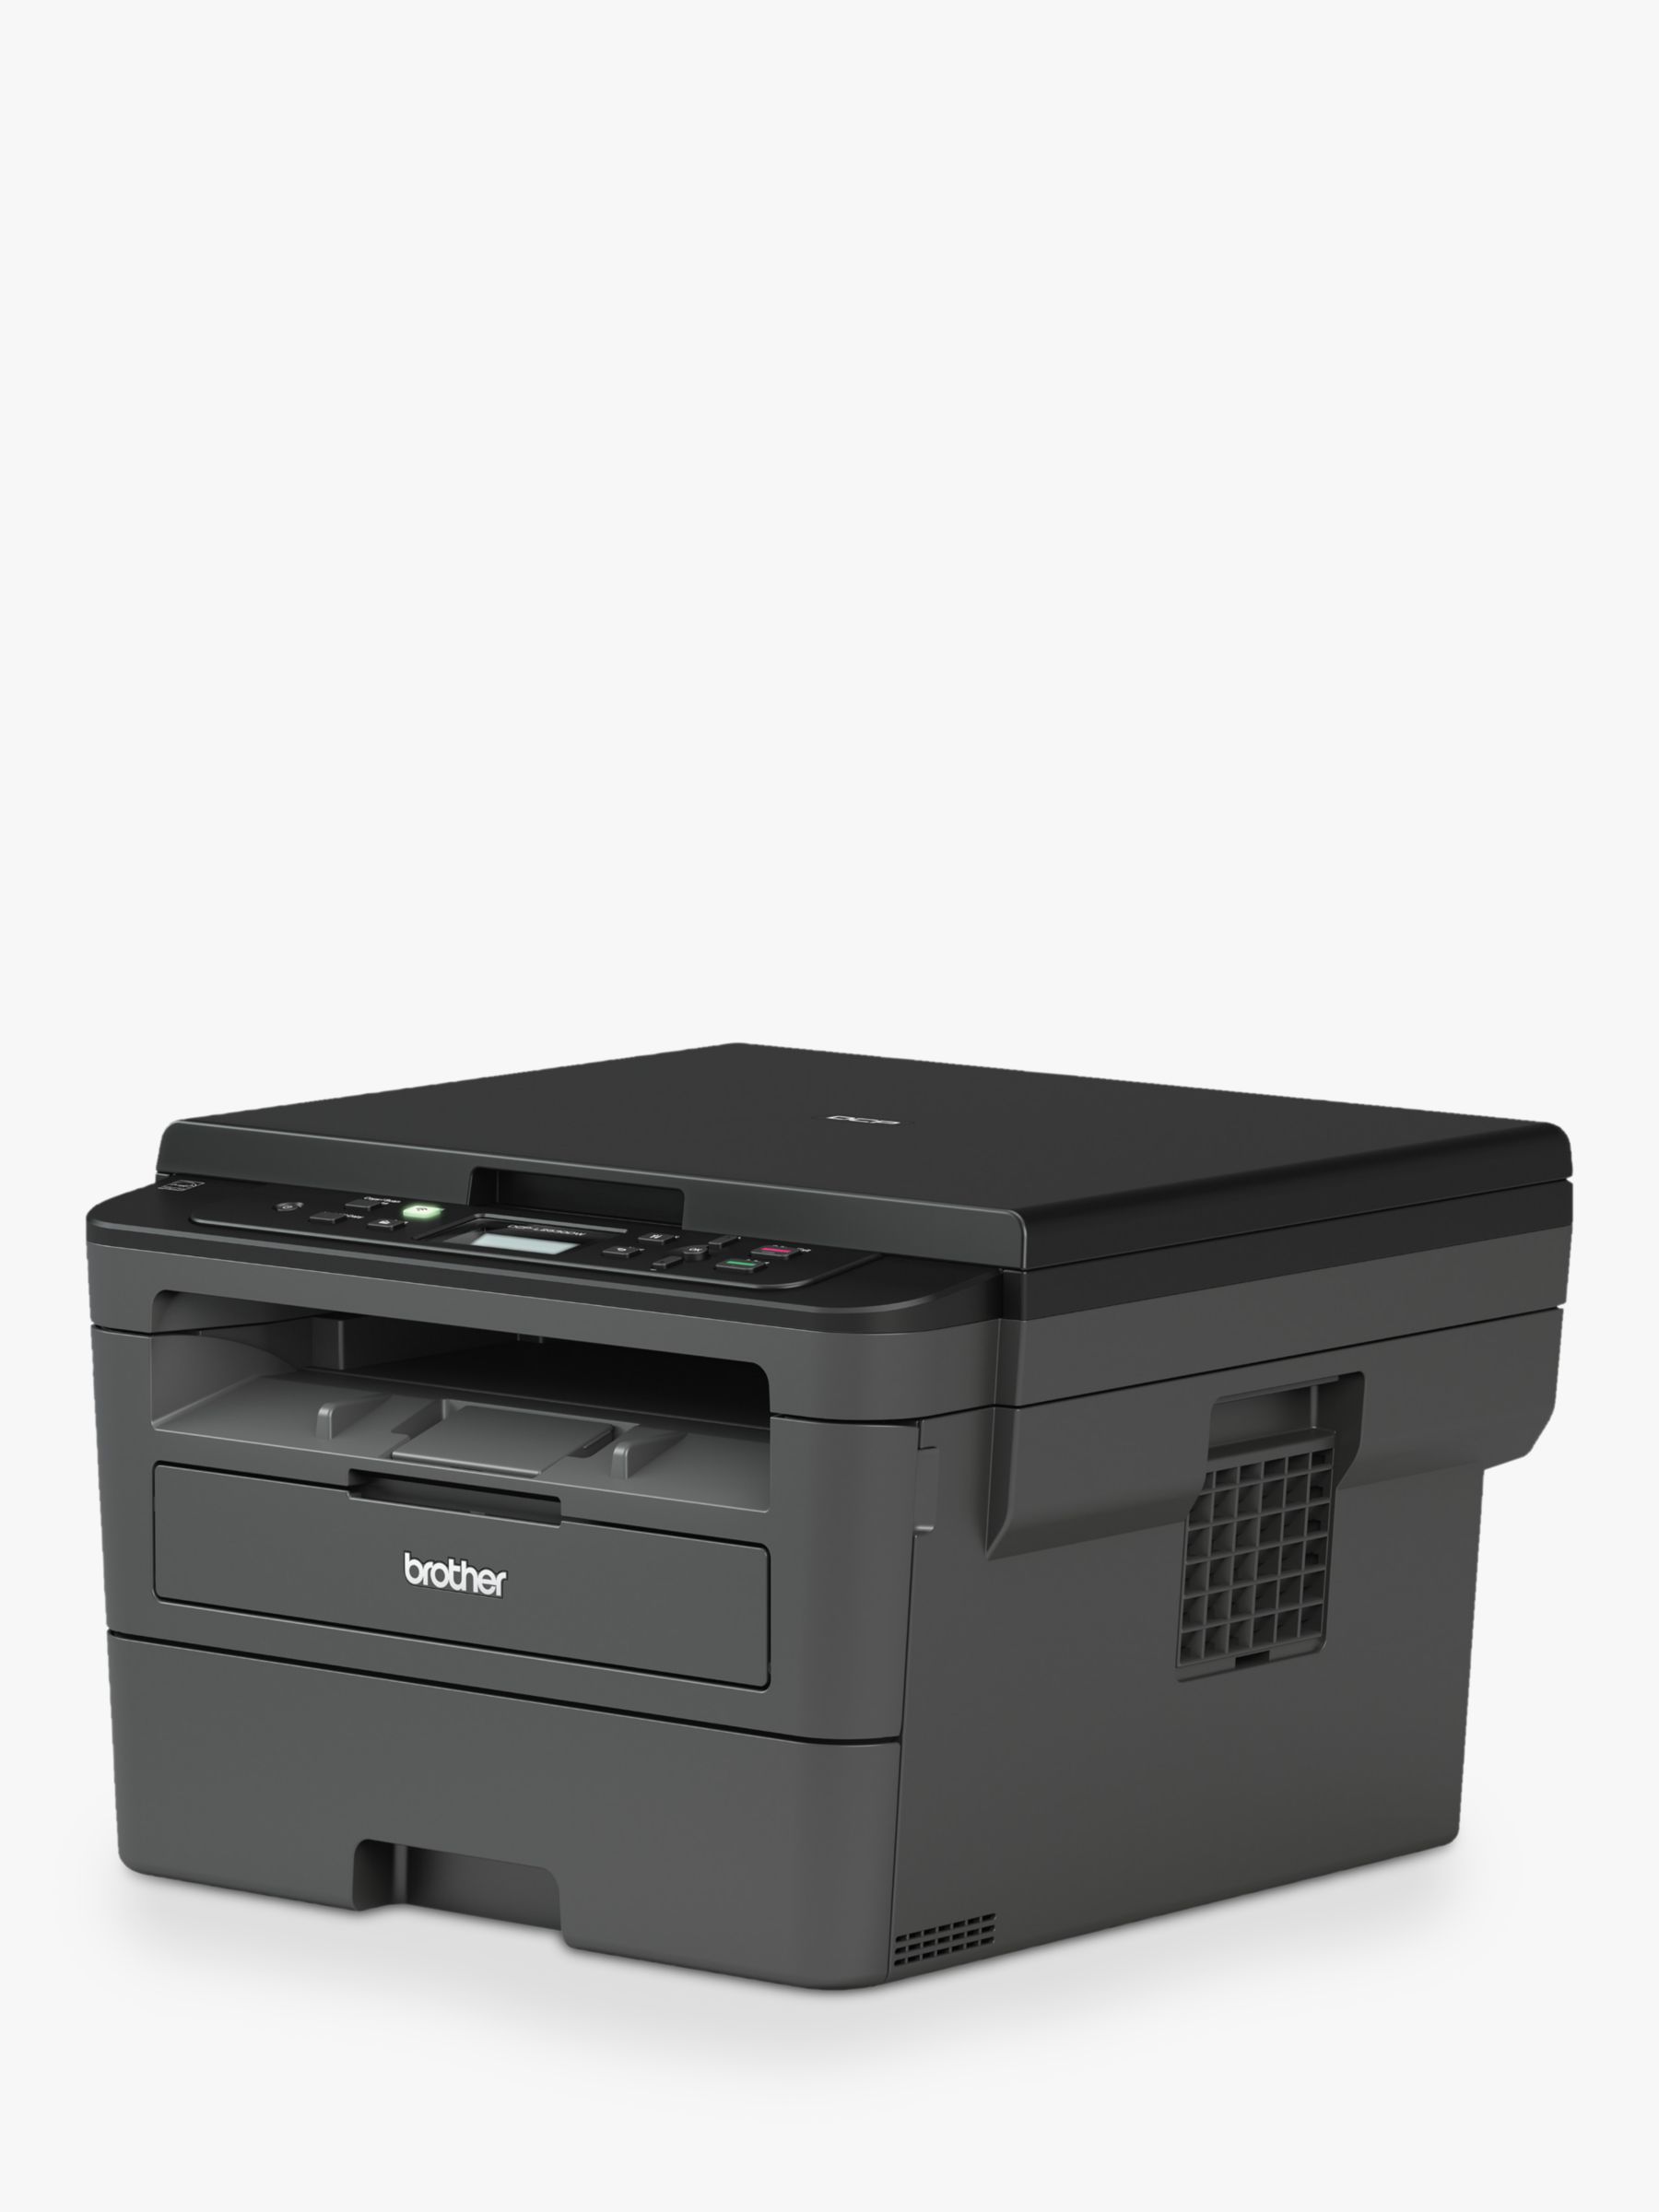 Brother DCP-L2530DW Compact Three-In-One Mono Printer, Black